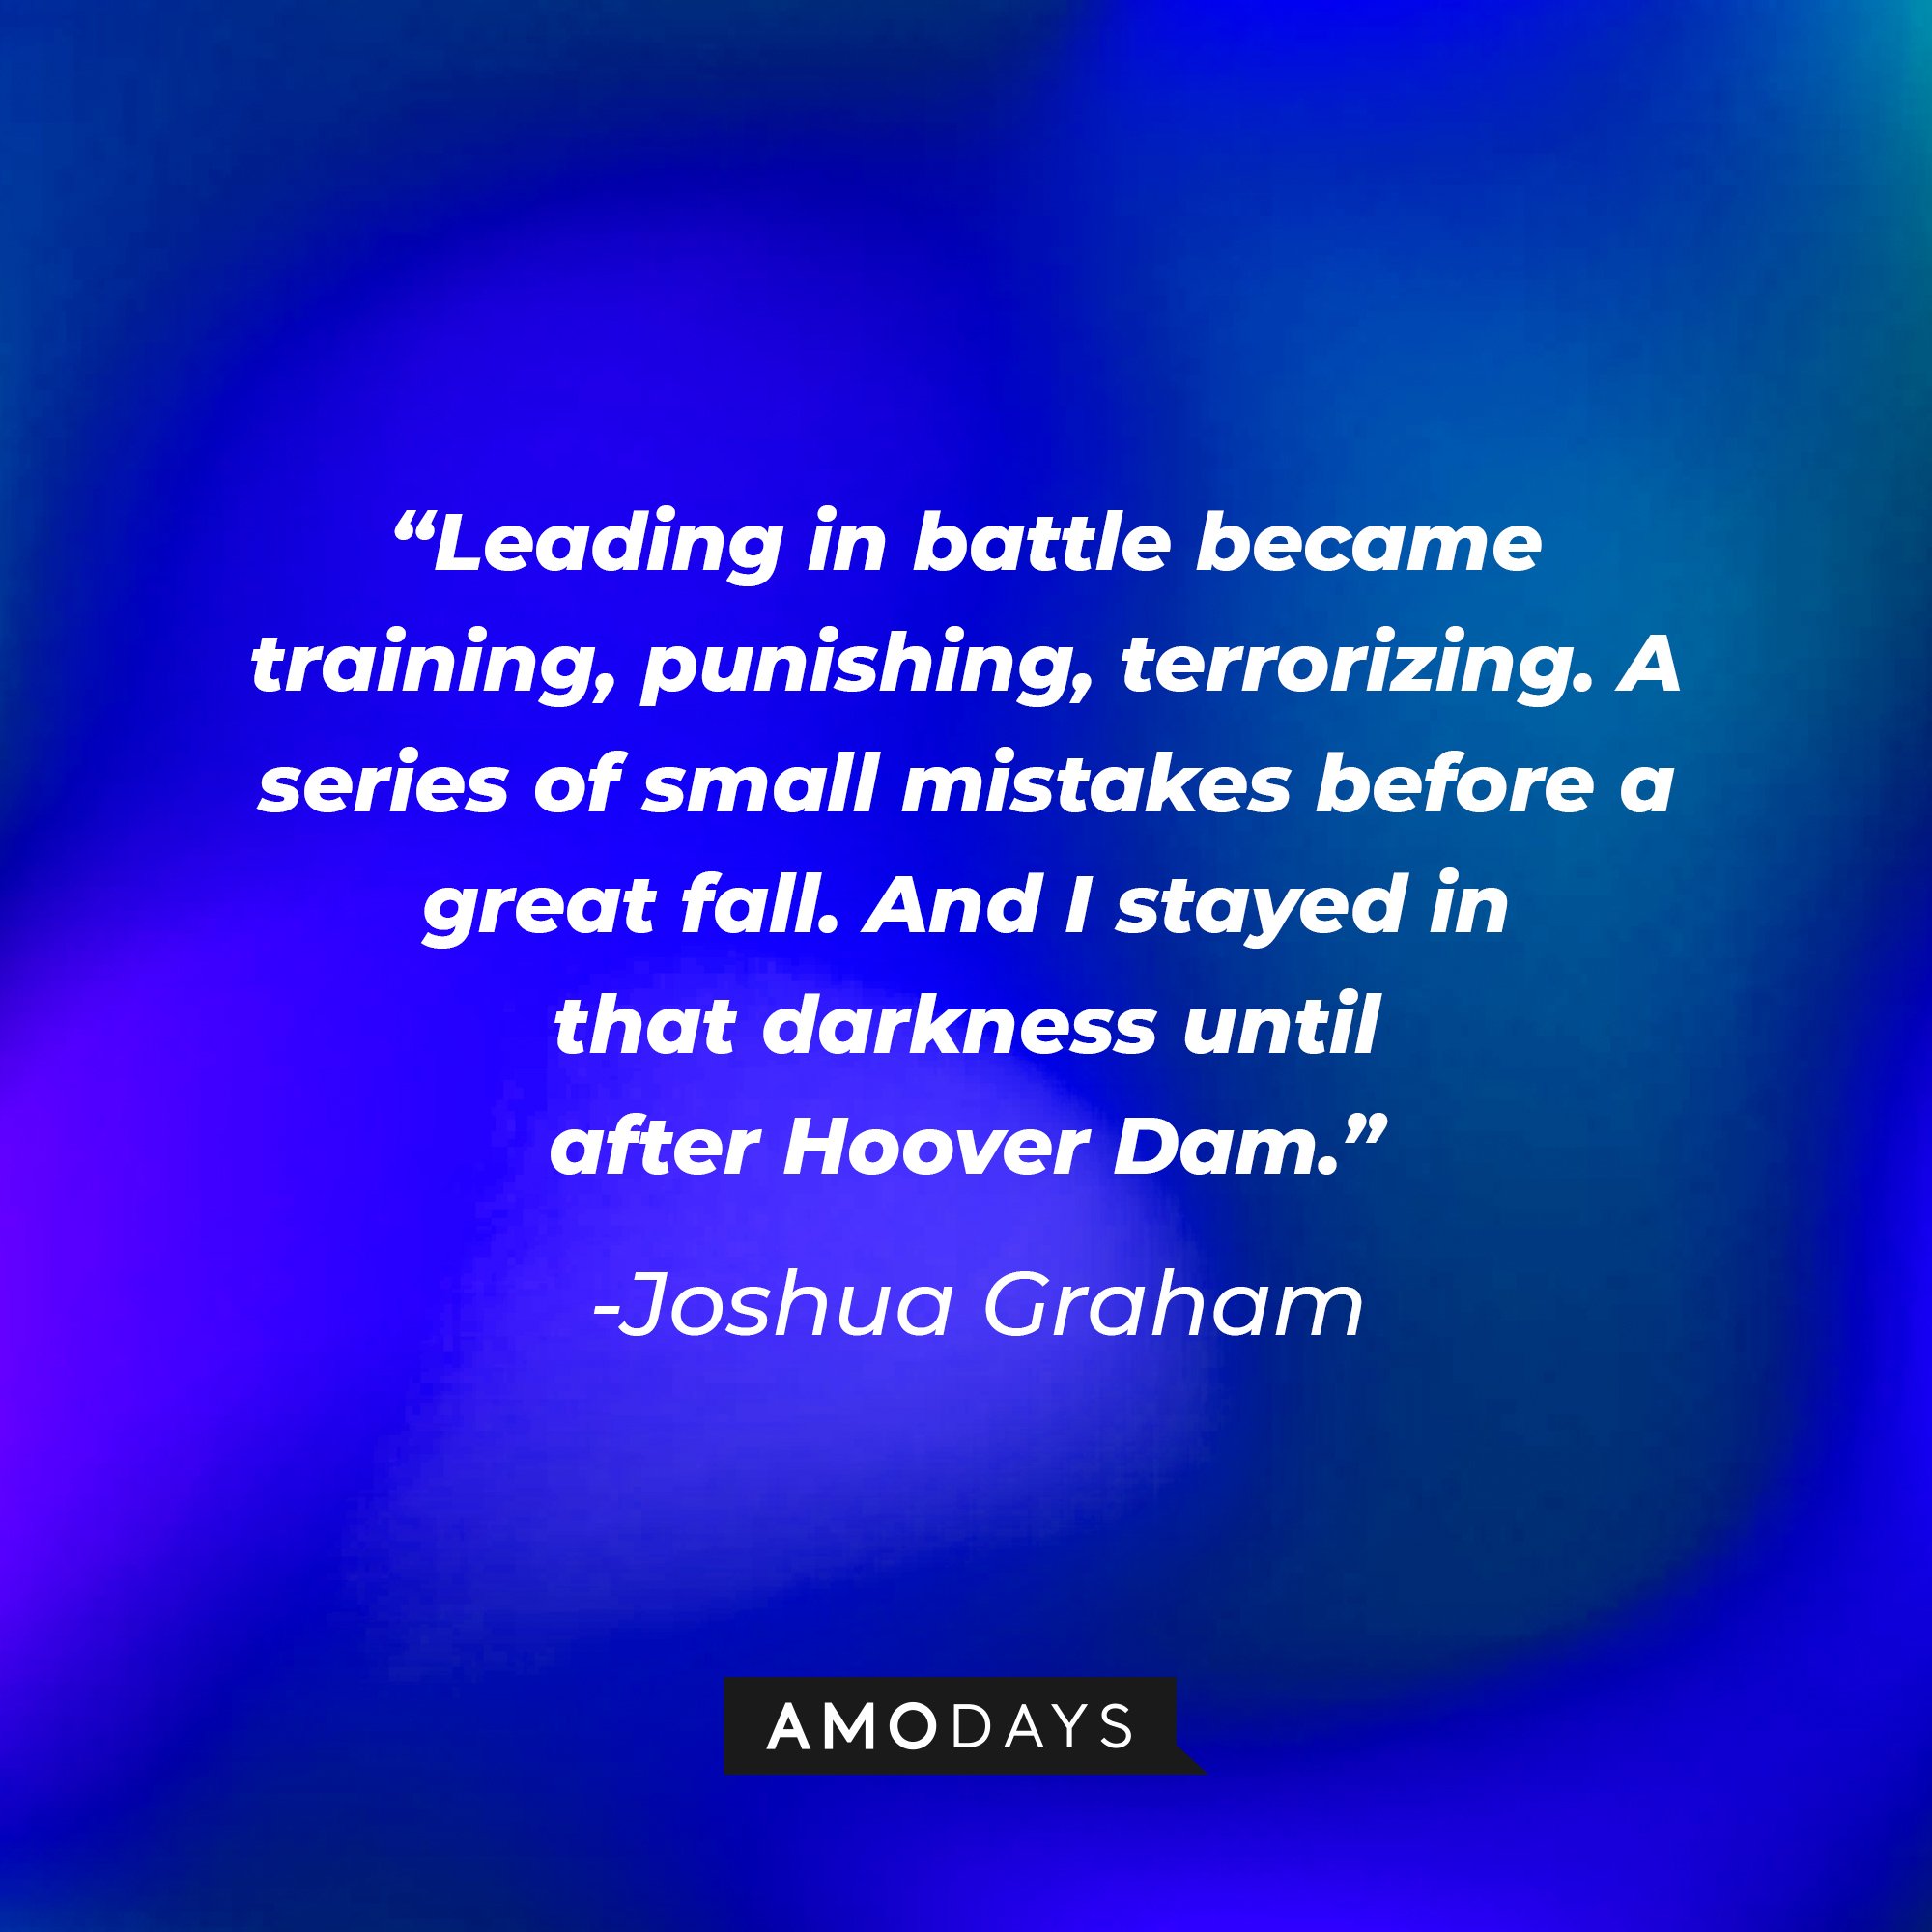 Joshua Graham's quote: “Leading in battle became training, punishing, terrorizing. A series of small mistakes before a great fall. And I stayed in that darkness until after Hoover Dam.”  | Source: Amodays